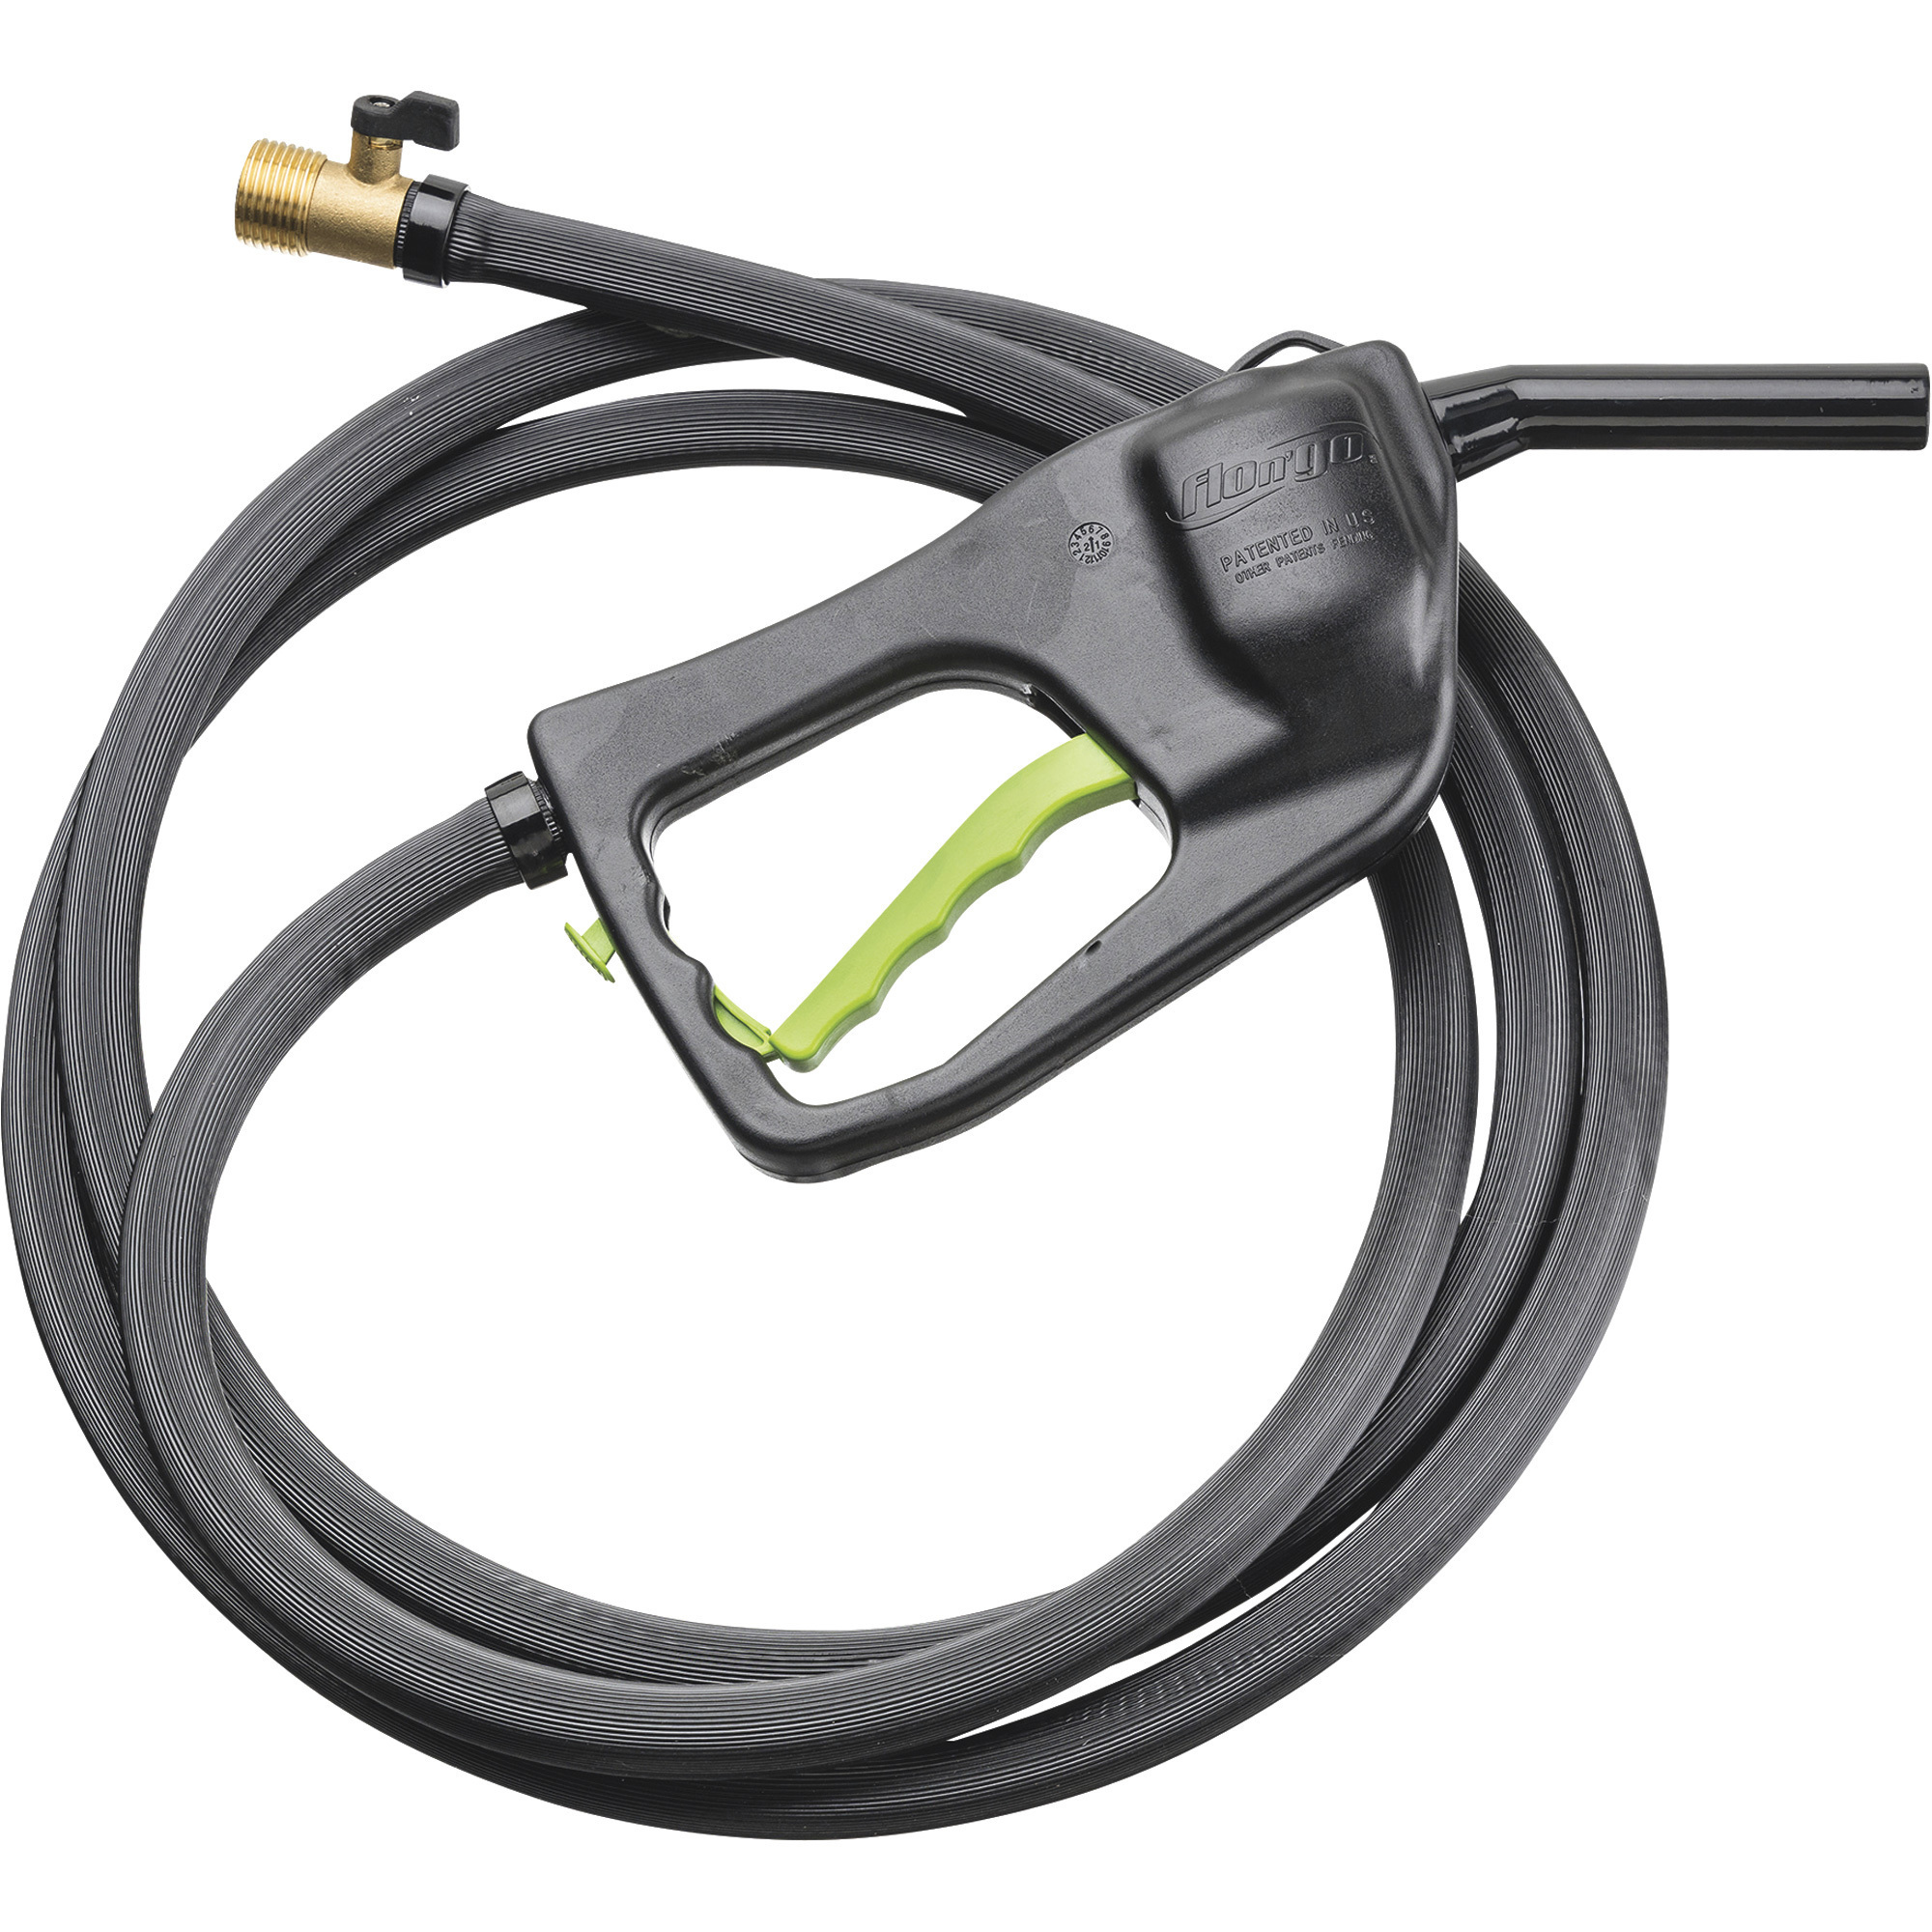 Flo n' Go Duramax Gas Caddy Replacement Pump and Hose Assembly, For Use with Duramax 14-Gallon Gas Caddy, Model 06932